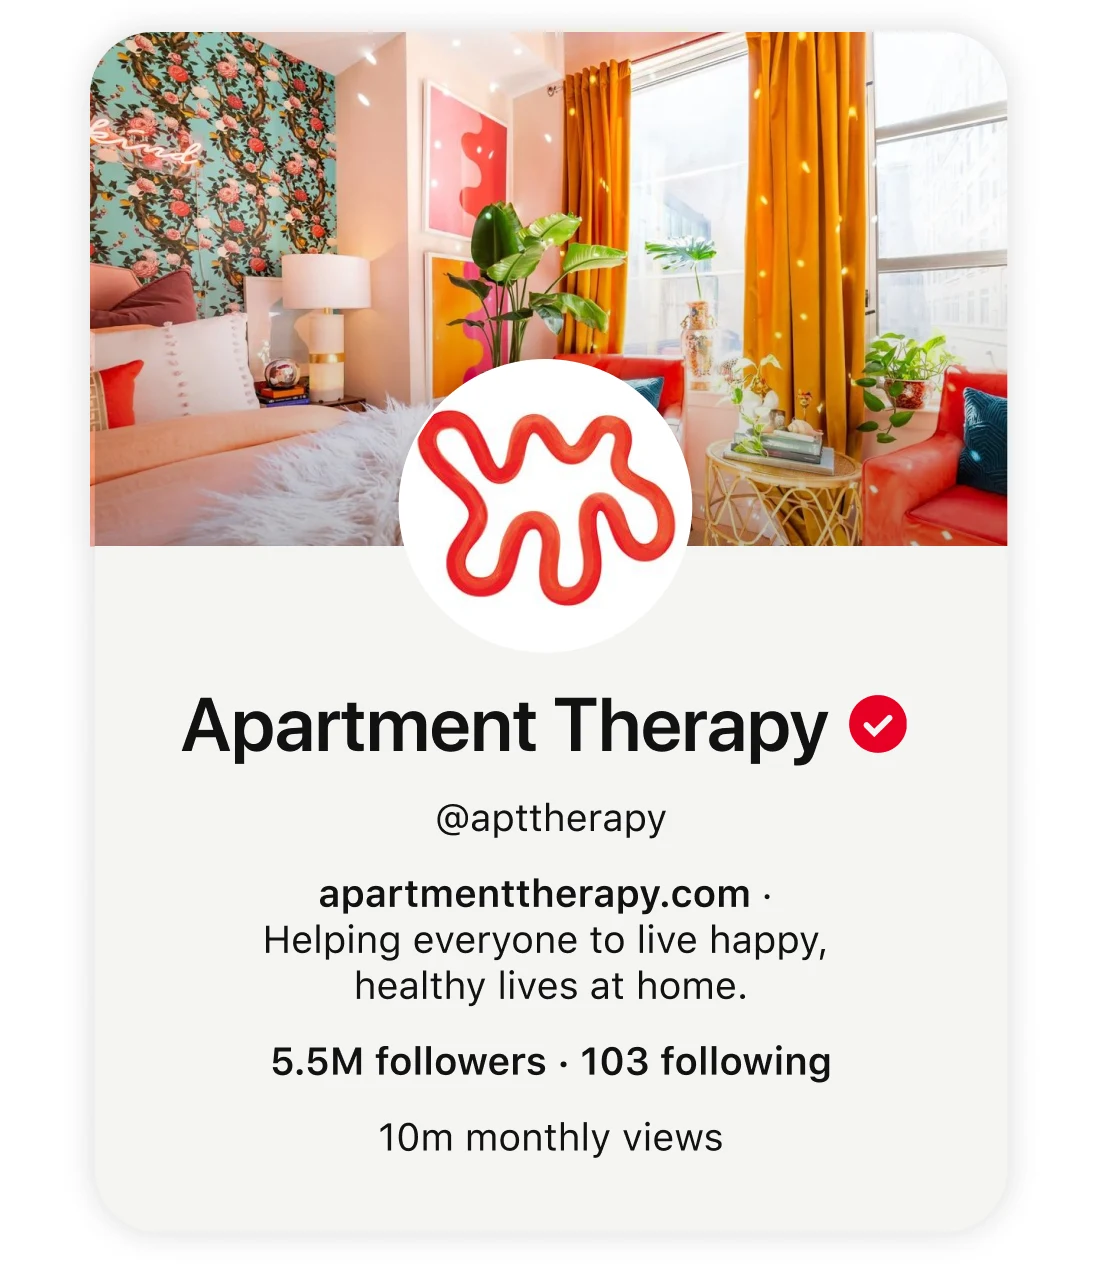  Apartment Therapy publisher Pinterest profile tile